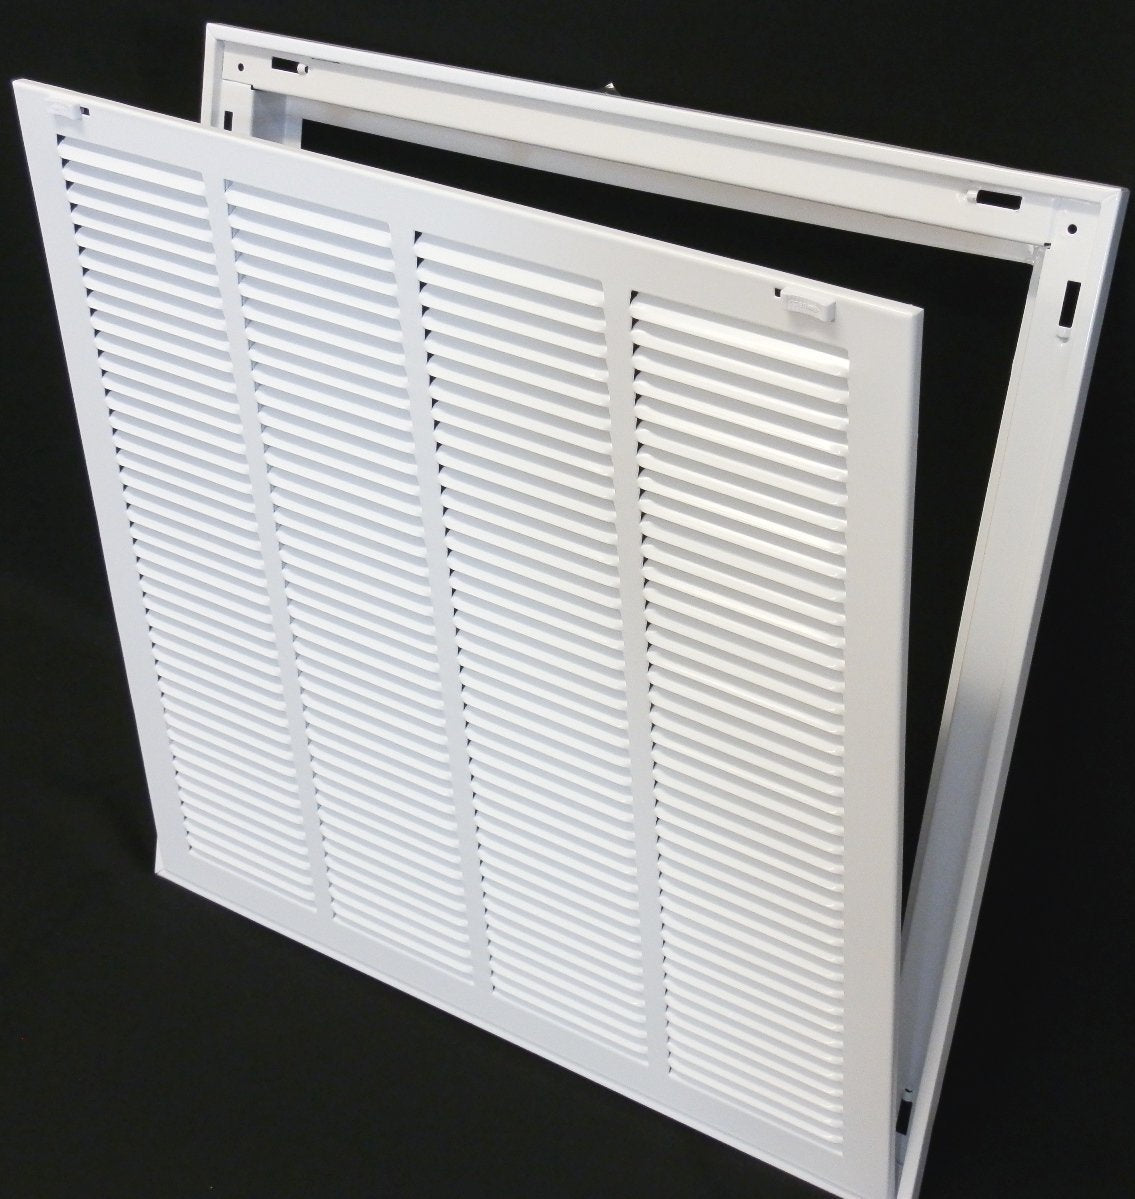 32&quot; X 20&quot; Steel Return Air Filter Grille for 1&quot; Filter - Removable Frame - [Outer Dimensions: 34 5/8&quot; X 22 5/8&quot;]